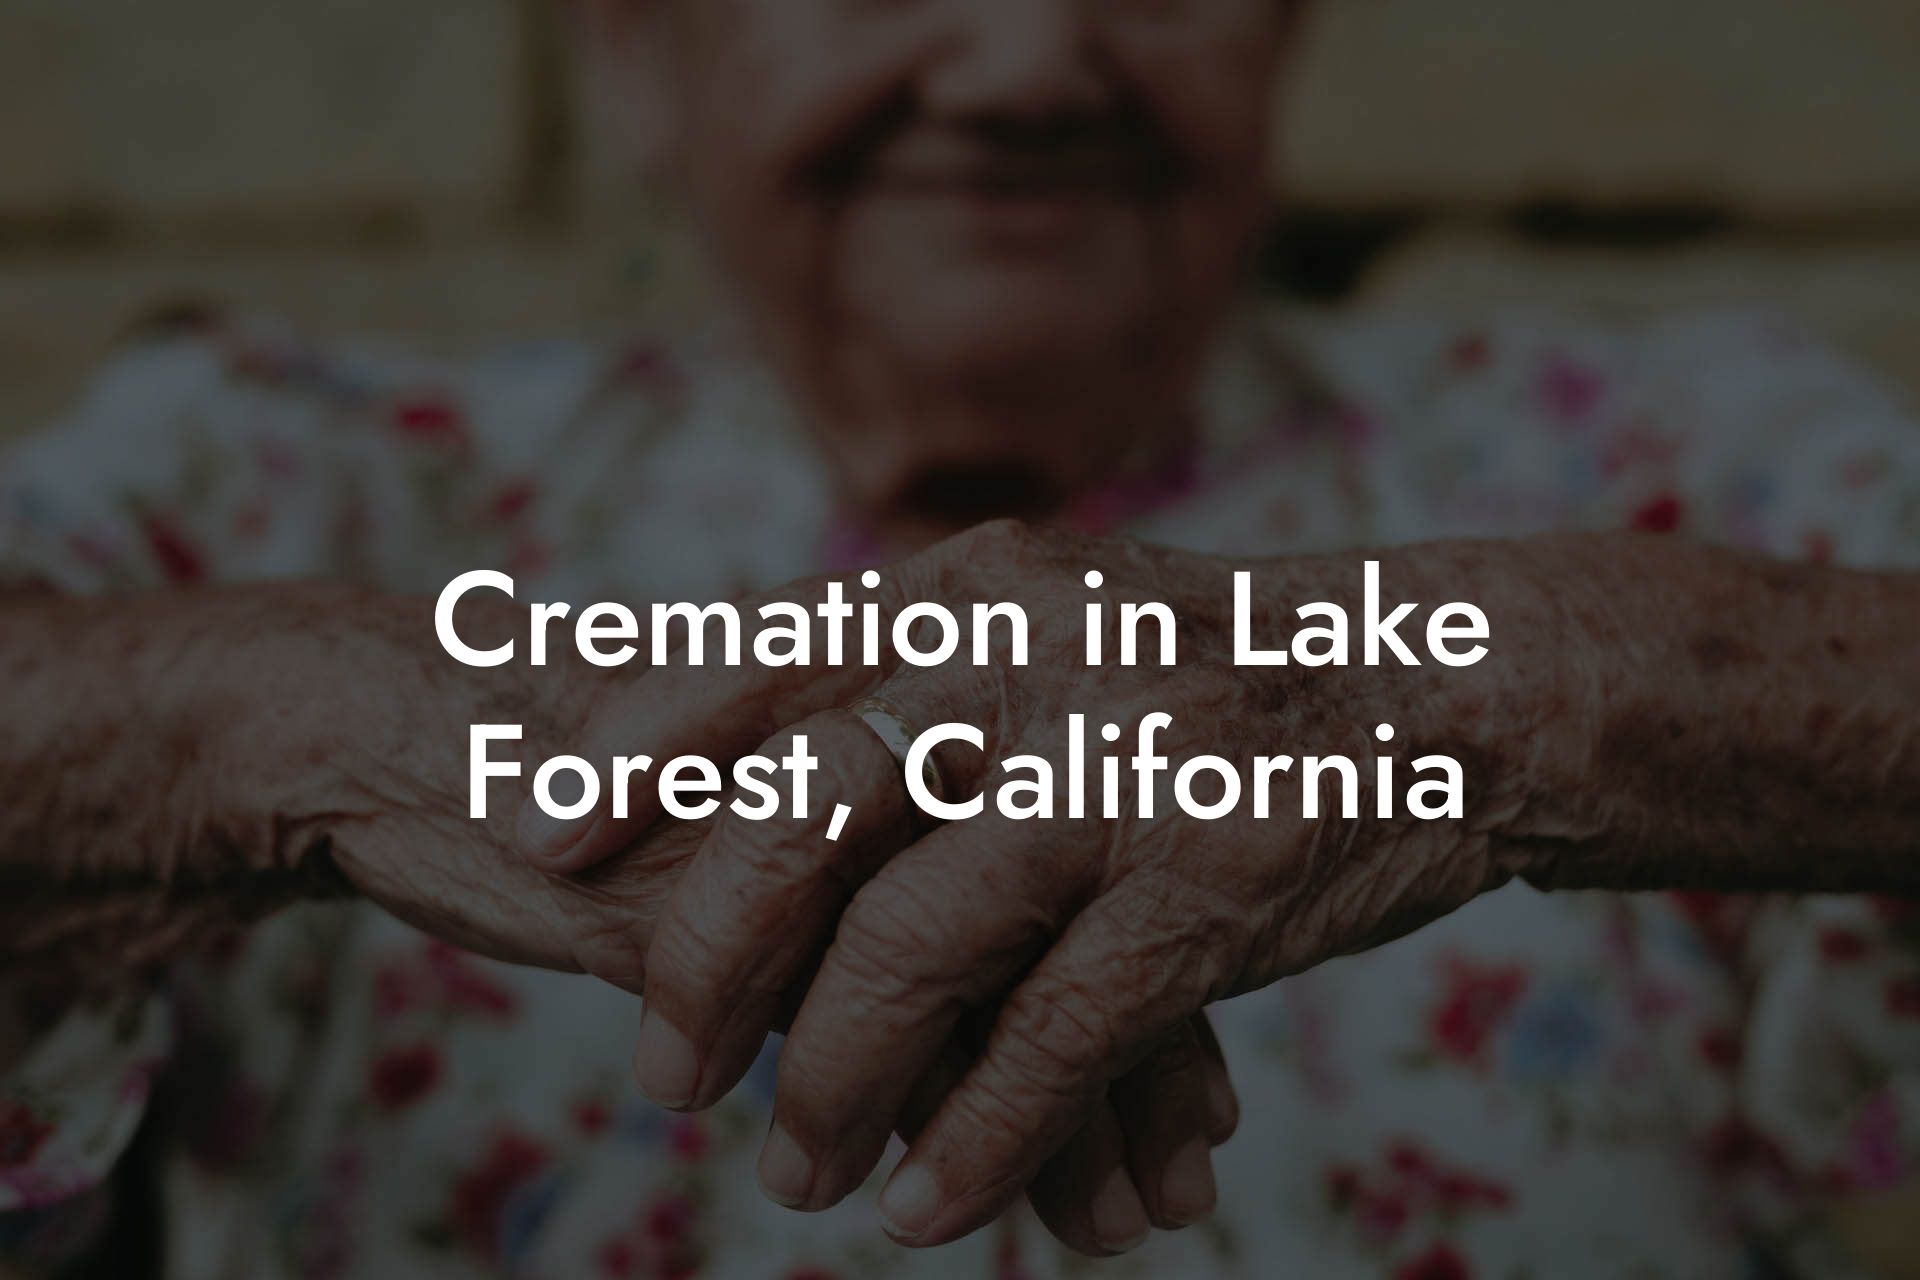 Cremation in Lake Forest, California